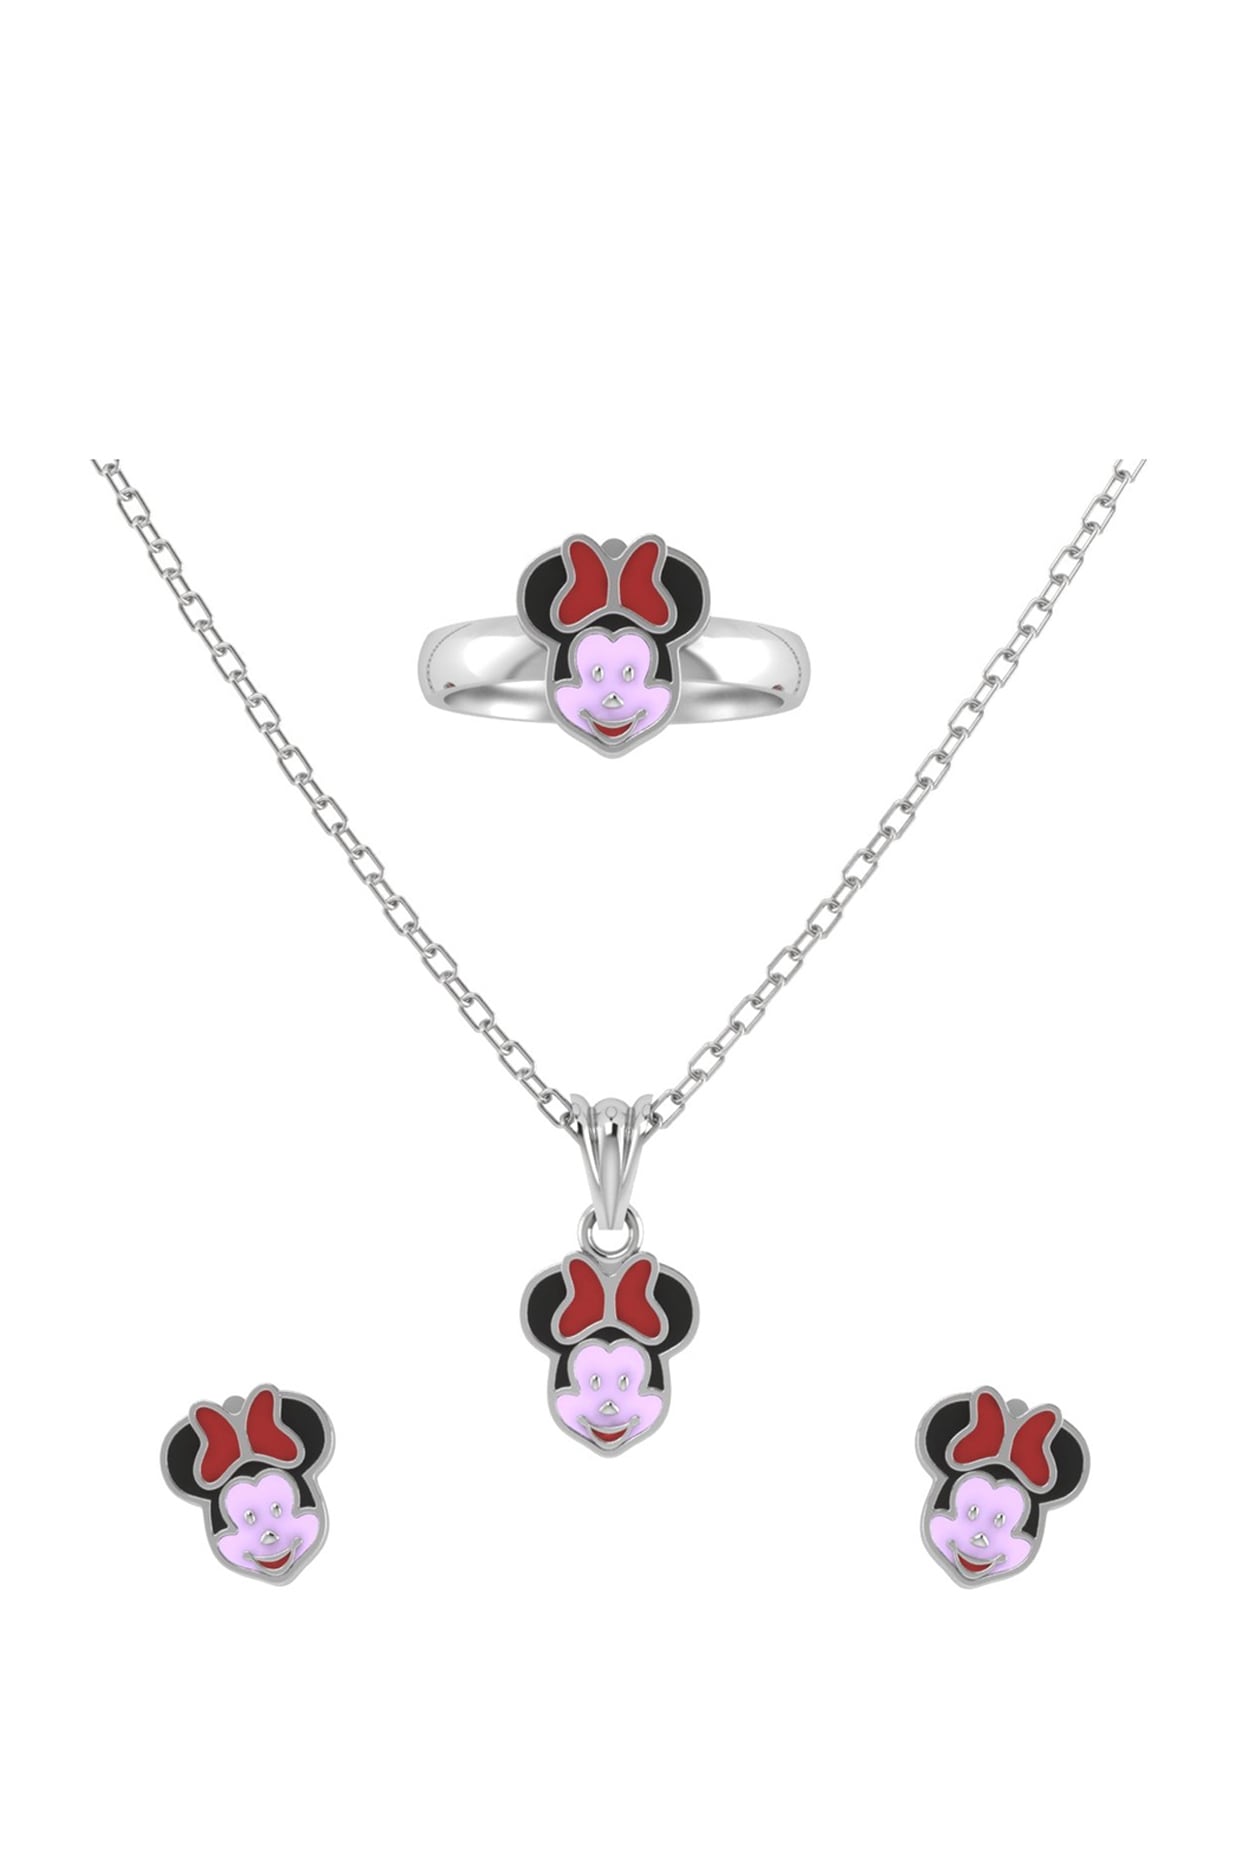 Disney Minnie Mouse Necklace Kids Jewelry and 13 similar items